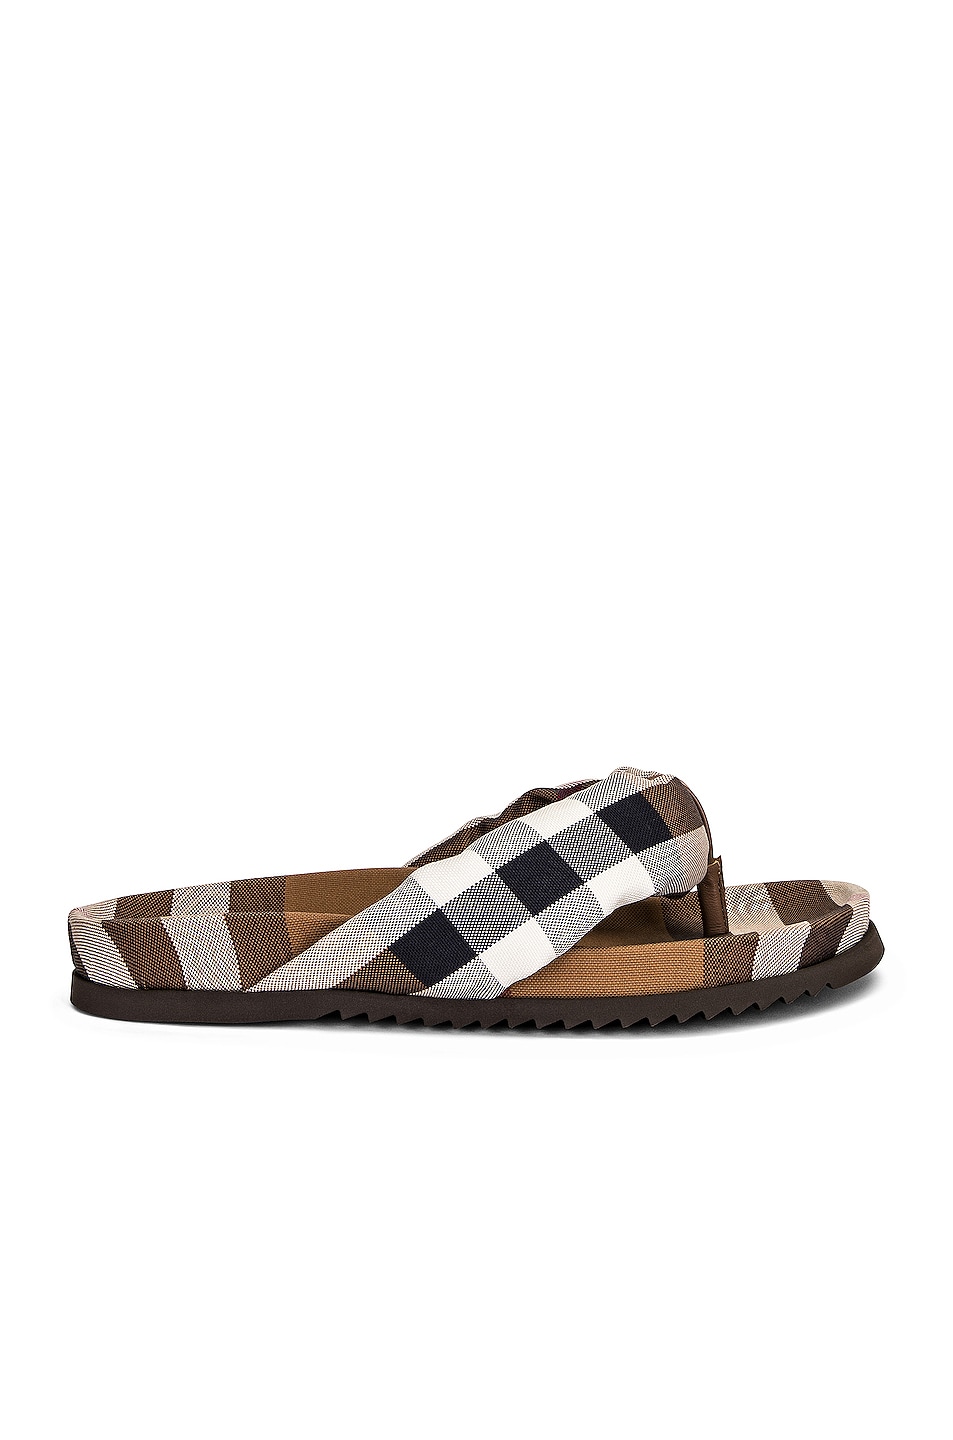 Image 1 of Burberry Duncannon Sandal in Birch Brown Check